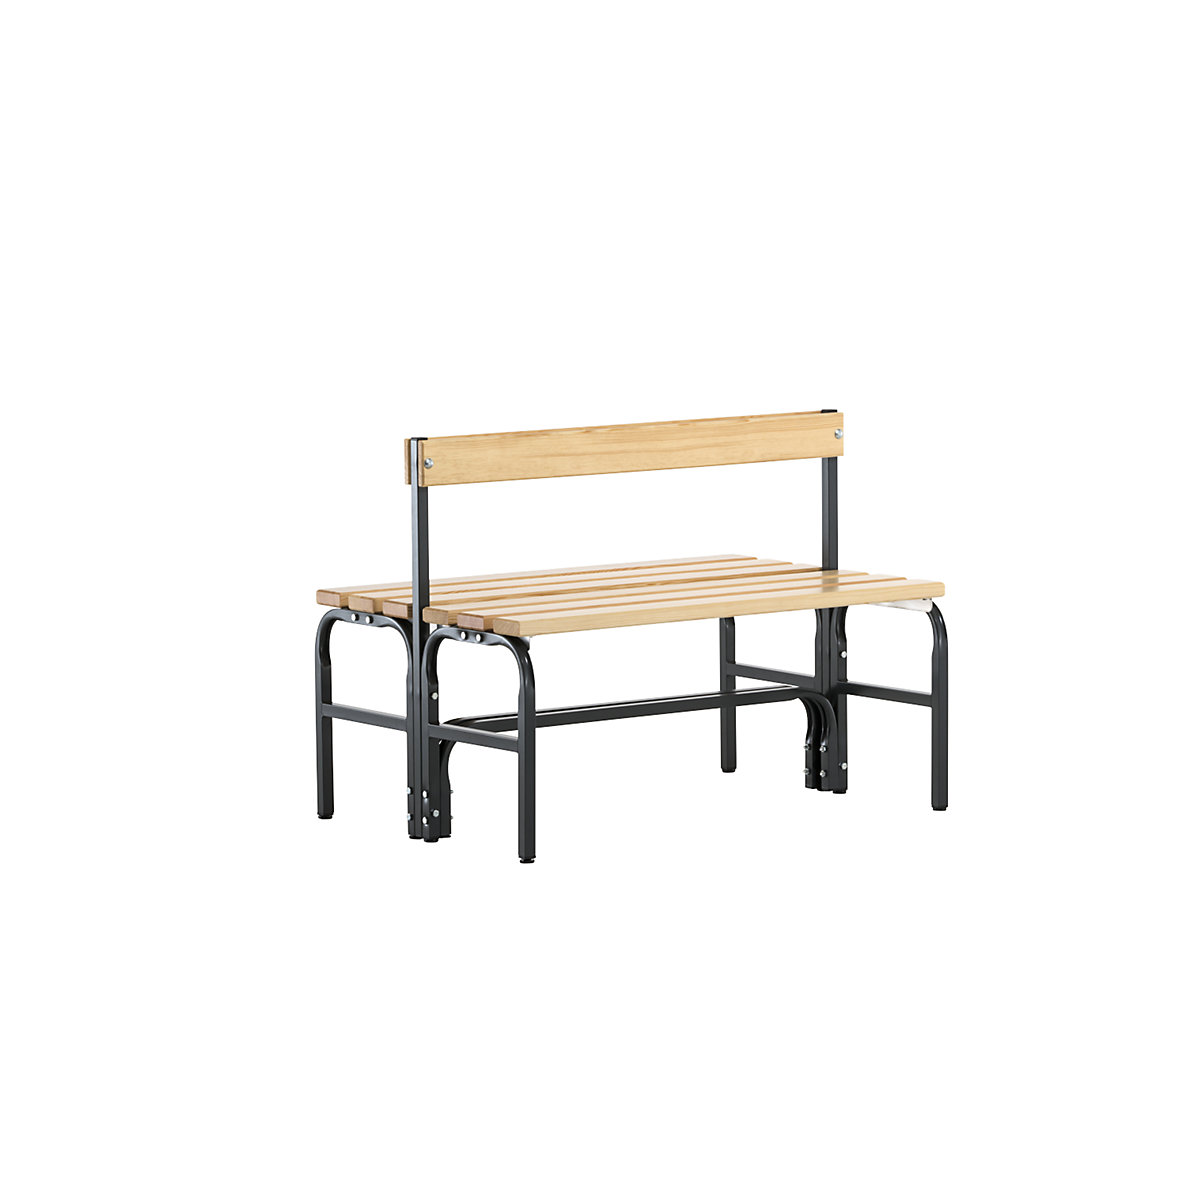 Half height cloakroom bench with back rest, double sided - Sypro